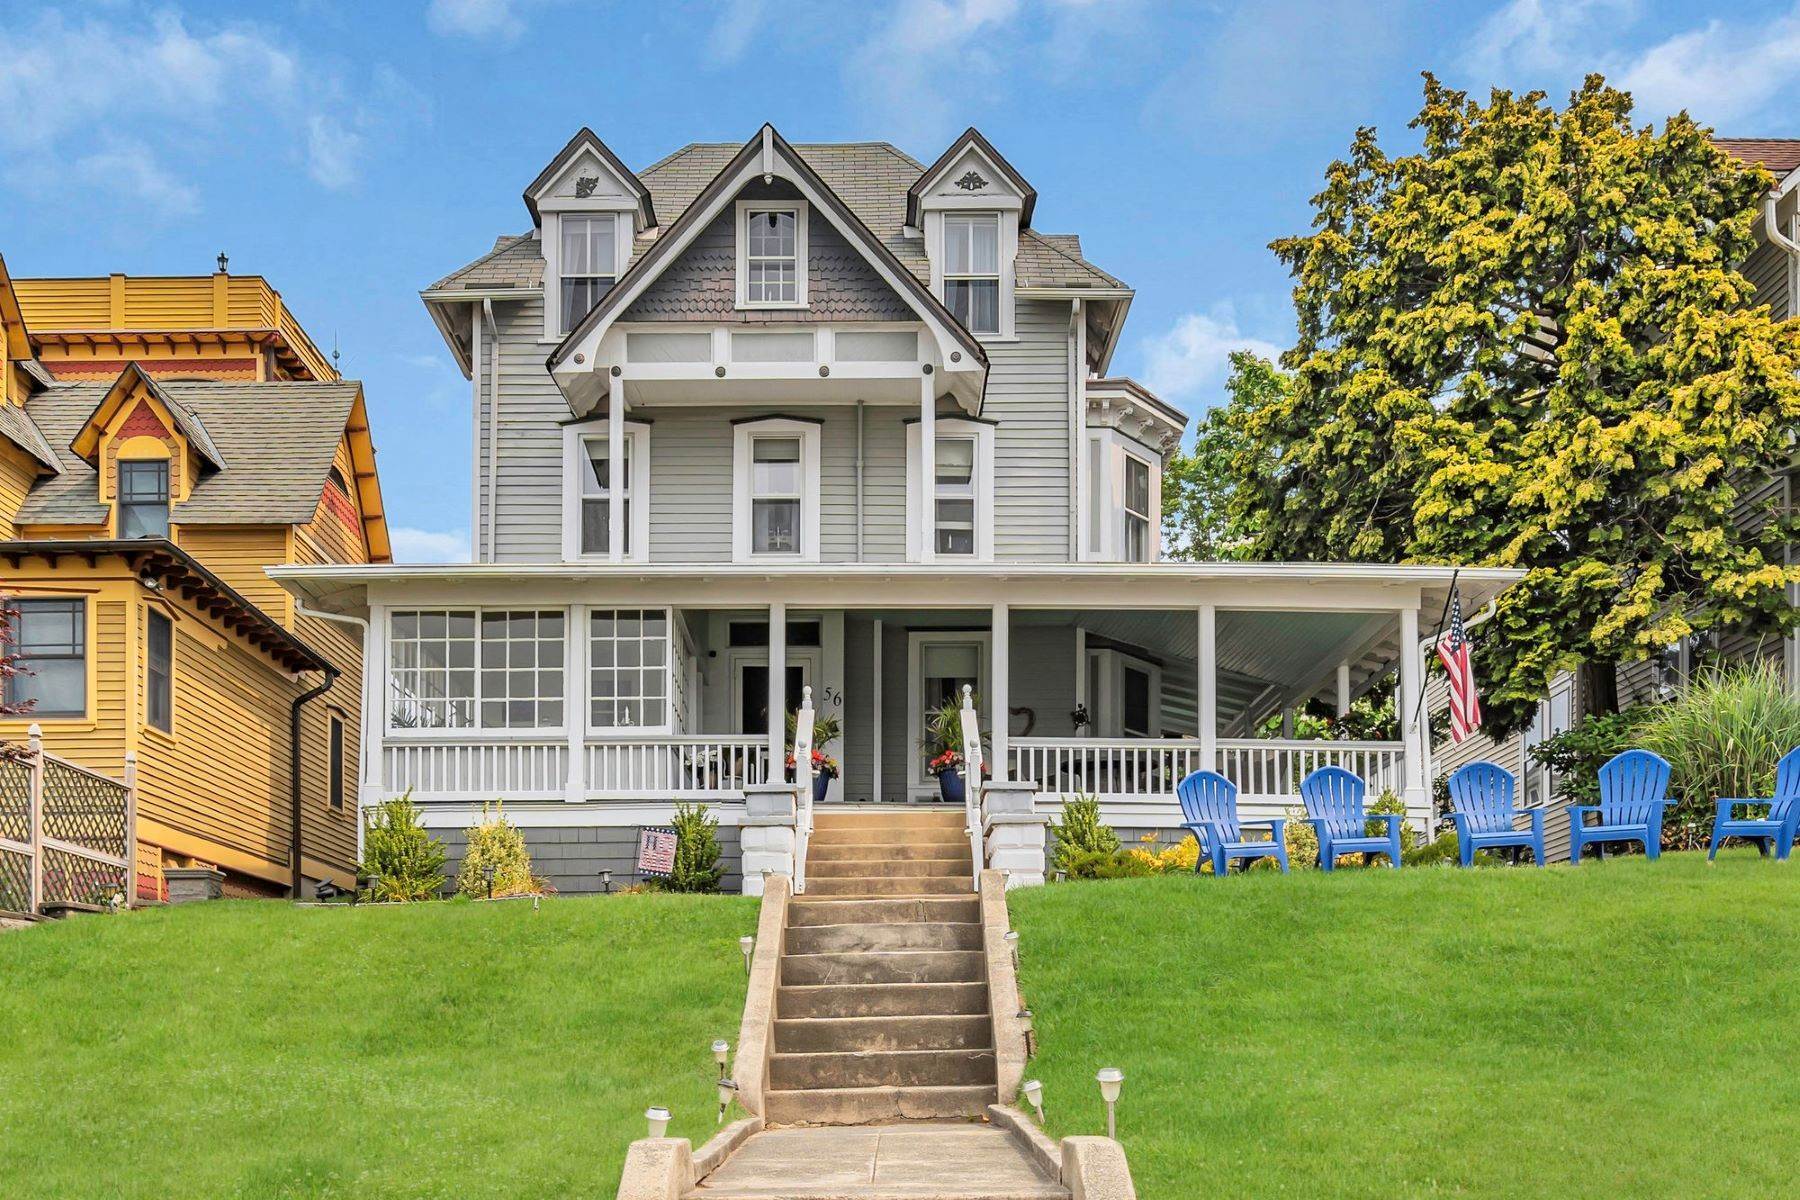 Single Family Homes for Sale at Stately Queen Anne Style Victorian Built in the Late 1870's 56 River Avenue Island Heights, New Jersey 08732 United States